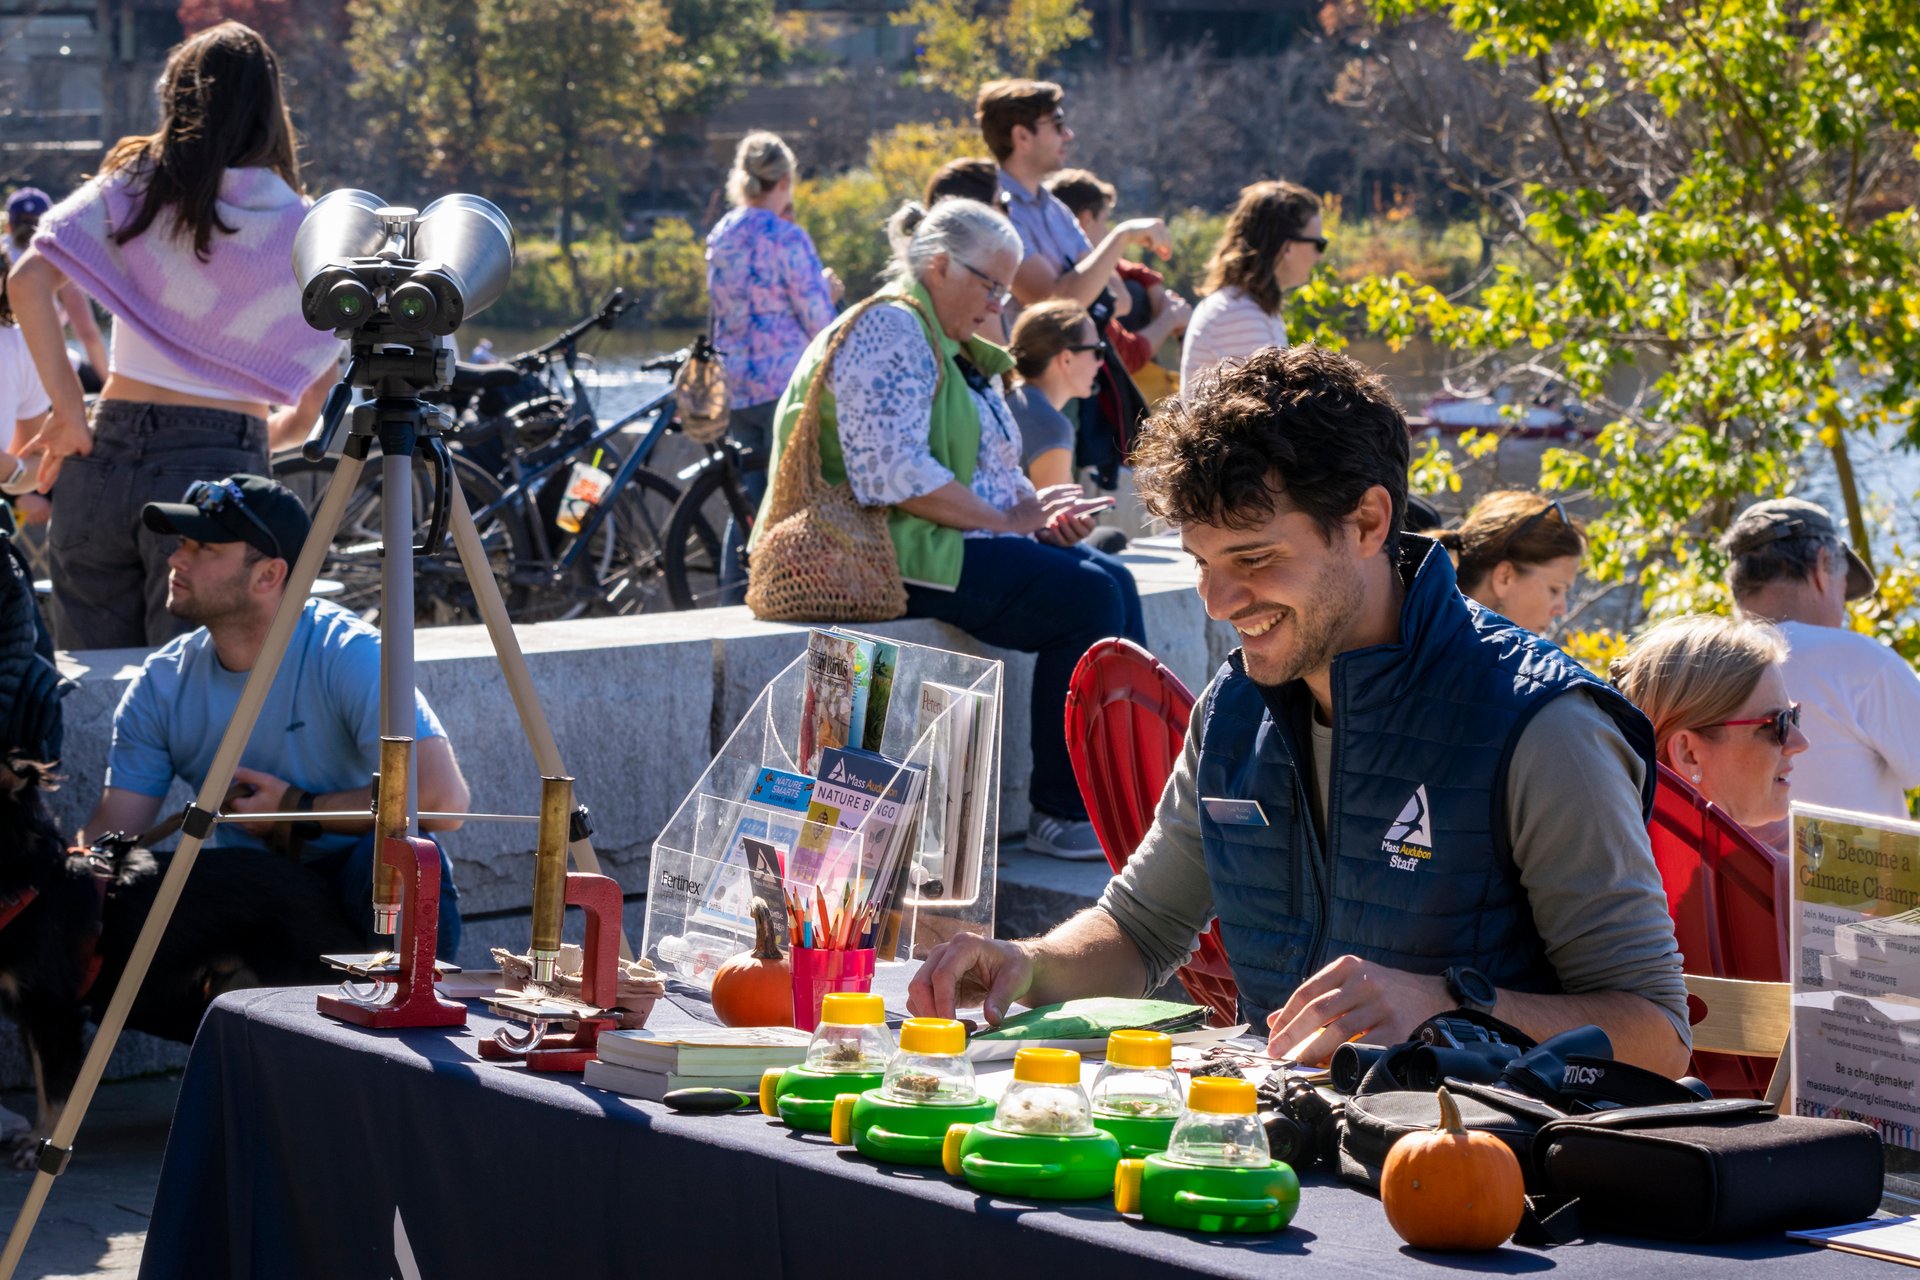 A man smiling with a Mass Audubon vest siting at a table with binoculars, microscopes, Mass Audubon promotional packets and paper.